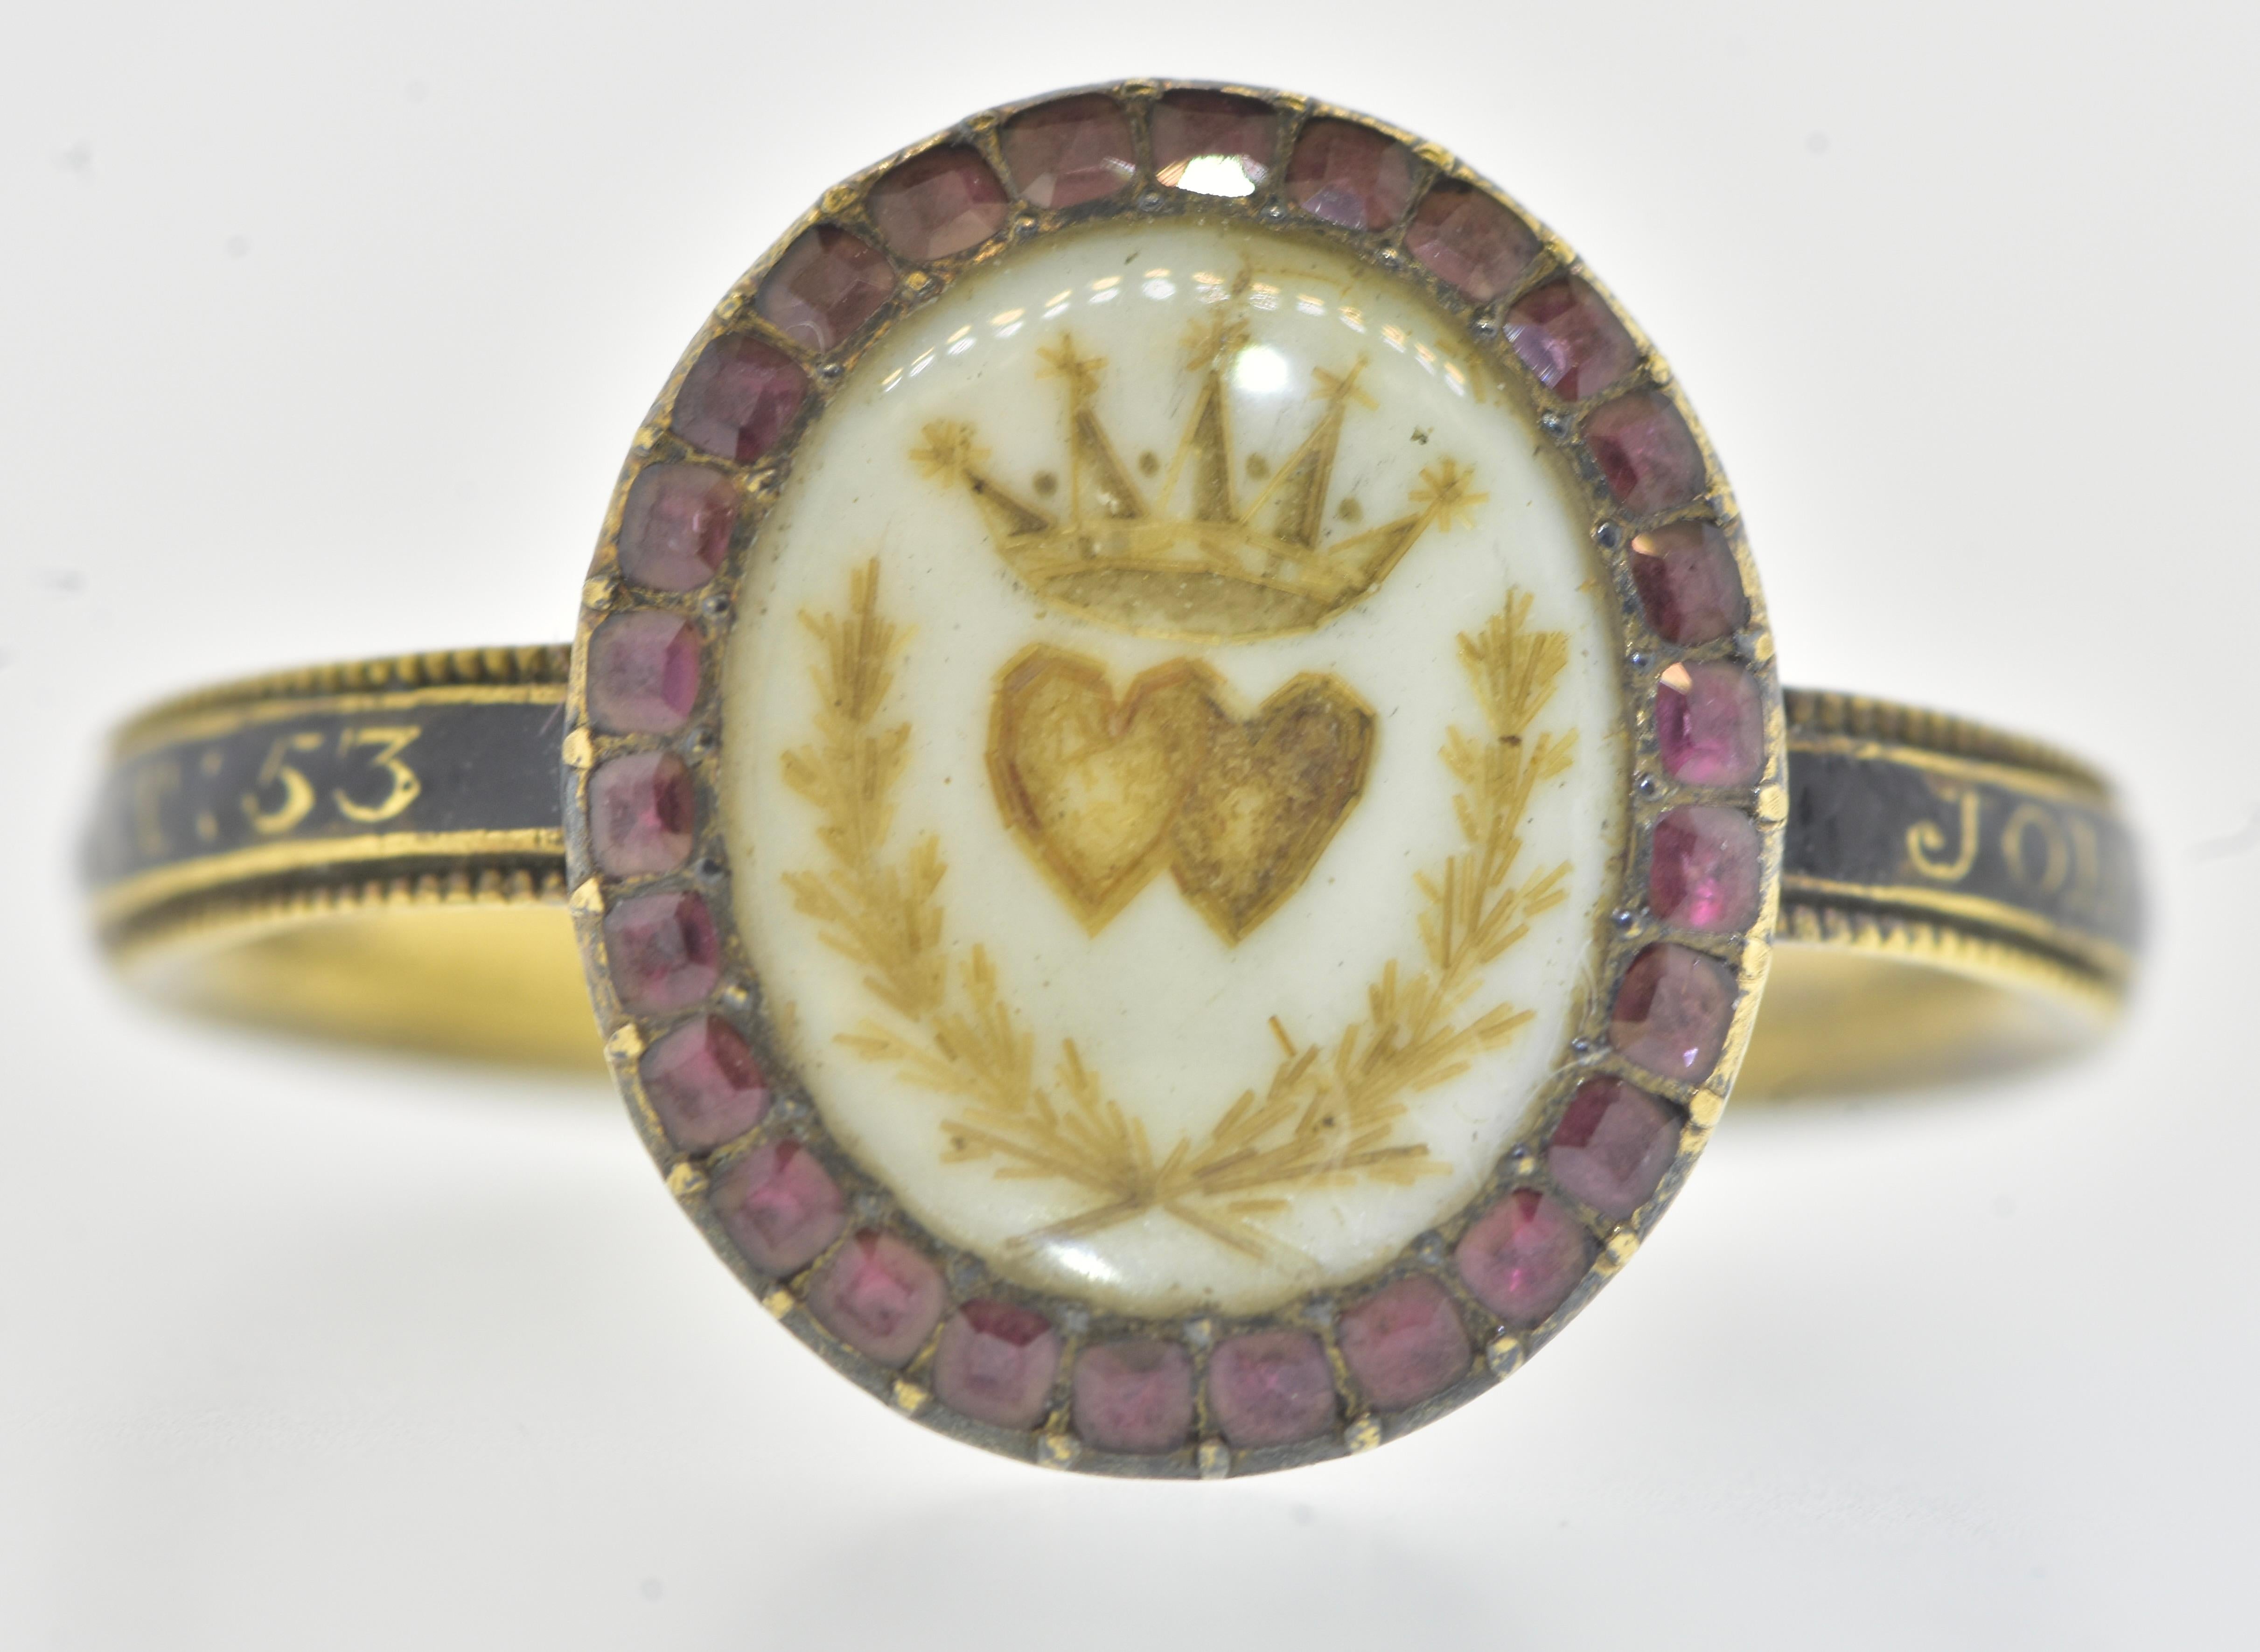 Antique Eighteenth Century 18K yellow gold ring decorated, under rock crystal, with two joined hearts under a crown and above crossed sprays of wheat on a white background. This was done in rudimentary or handmade fashion and painted with a handmade